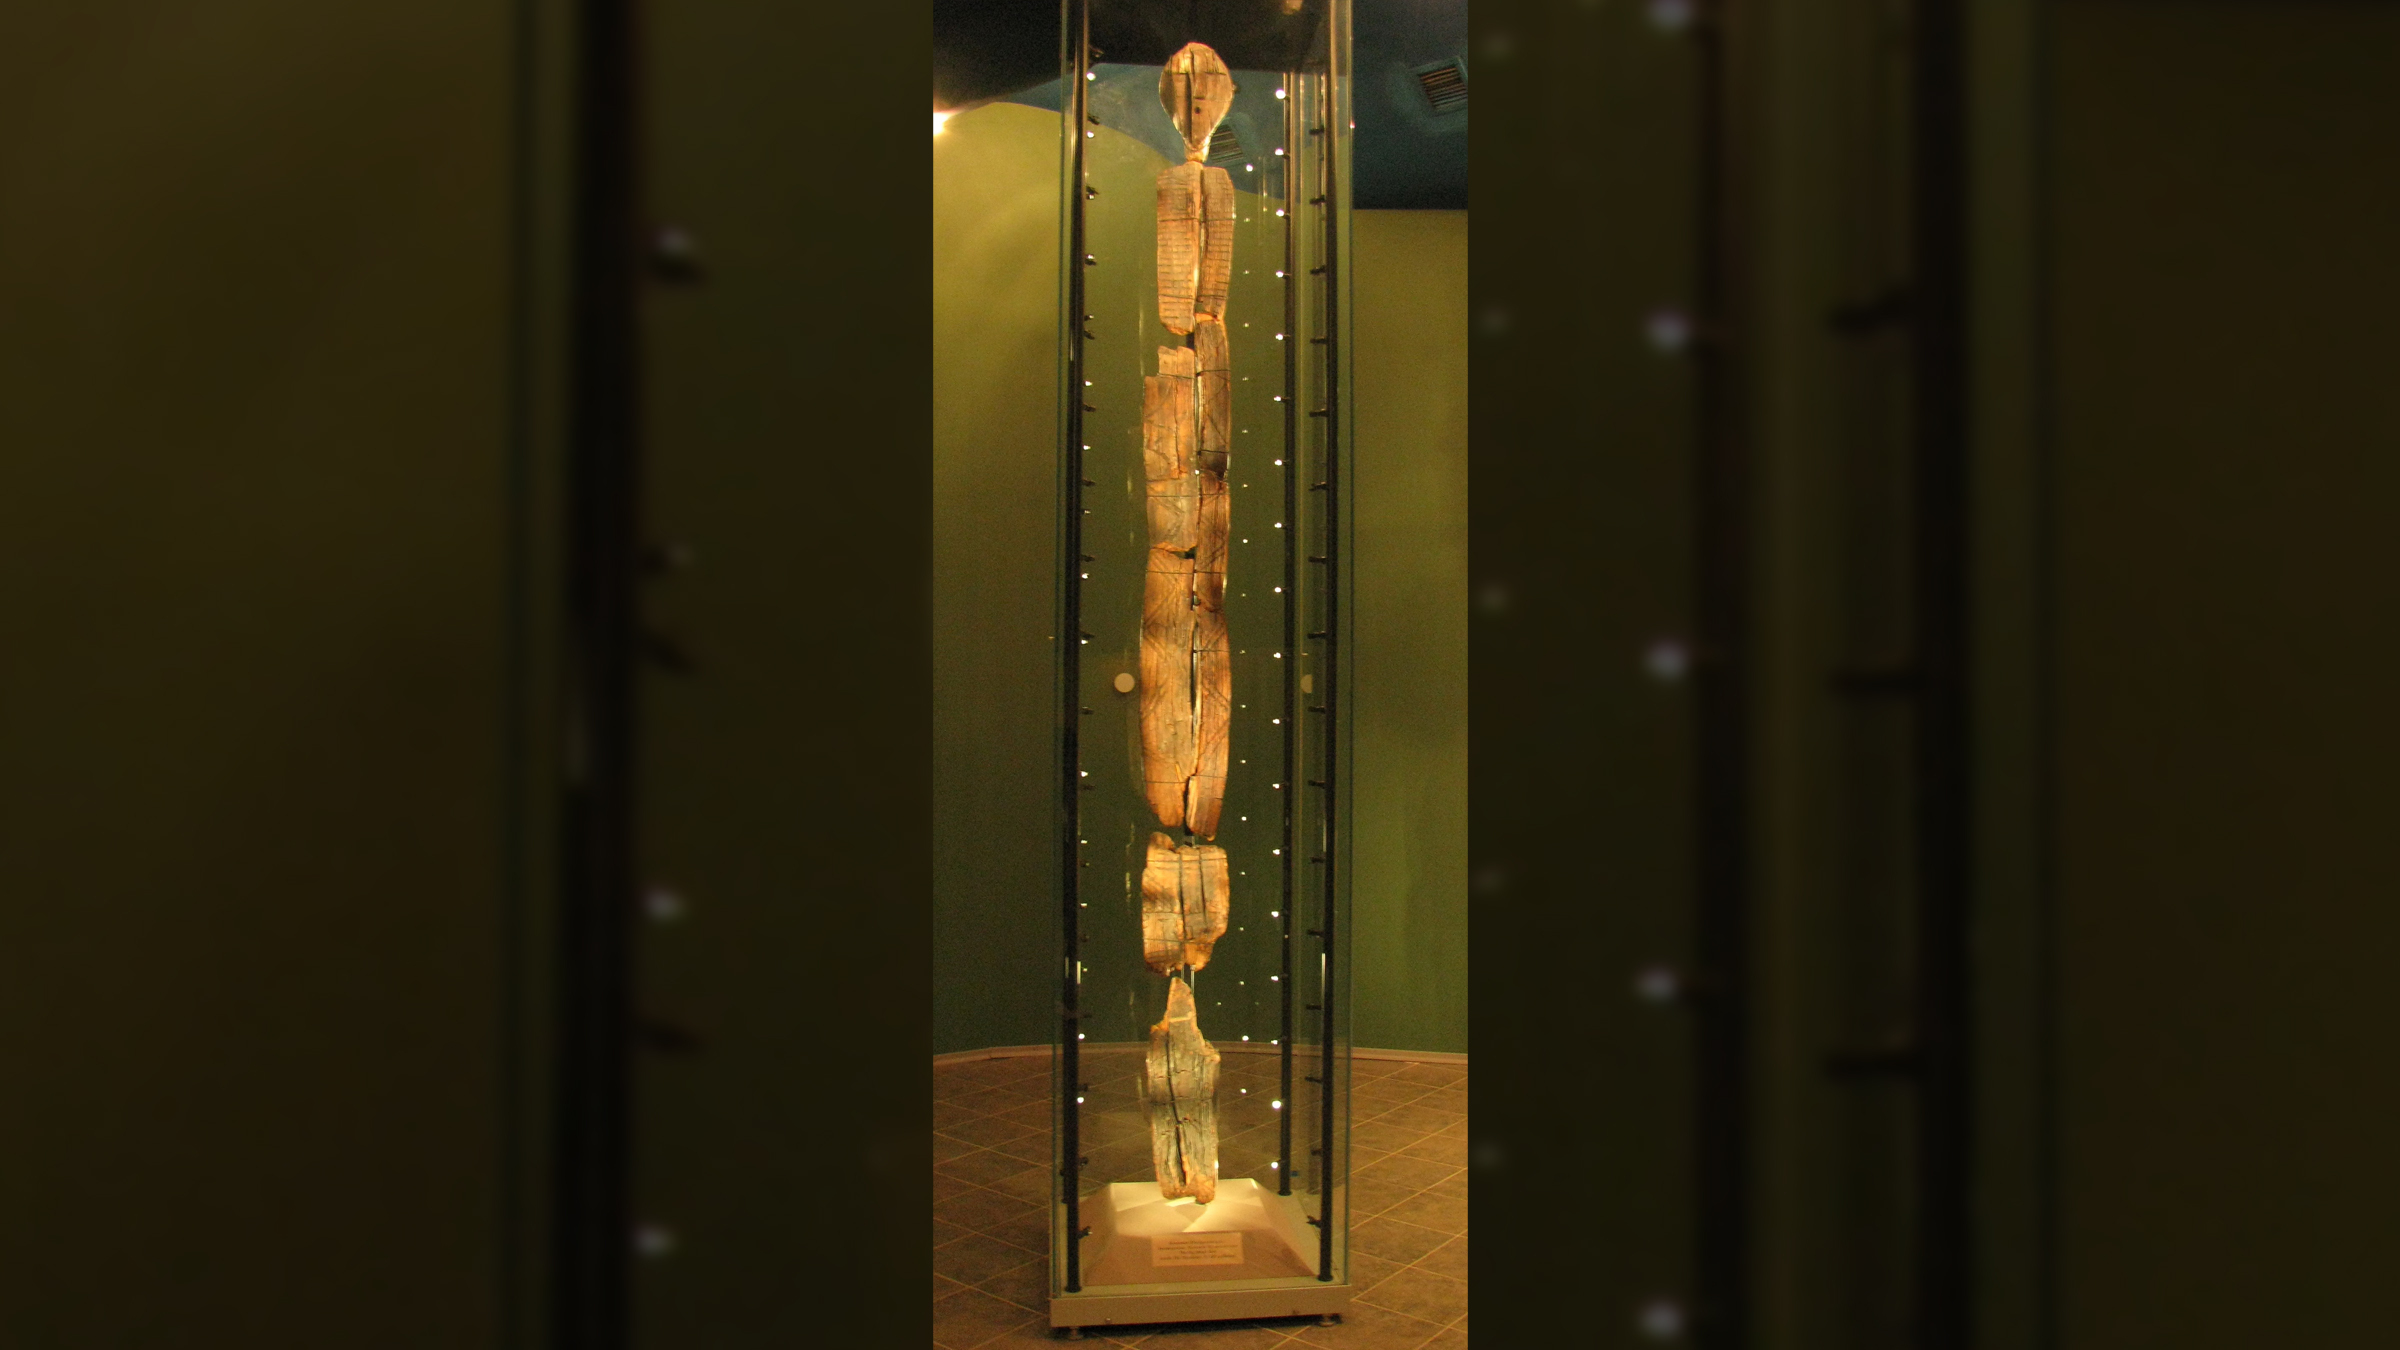 A tall carved statue in a museum